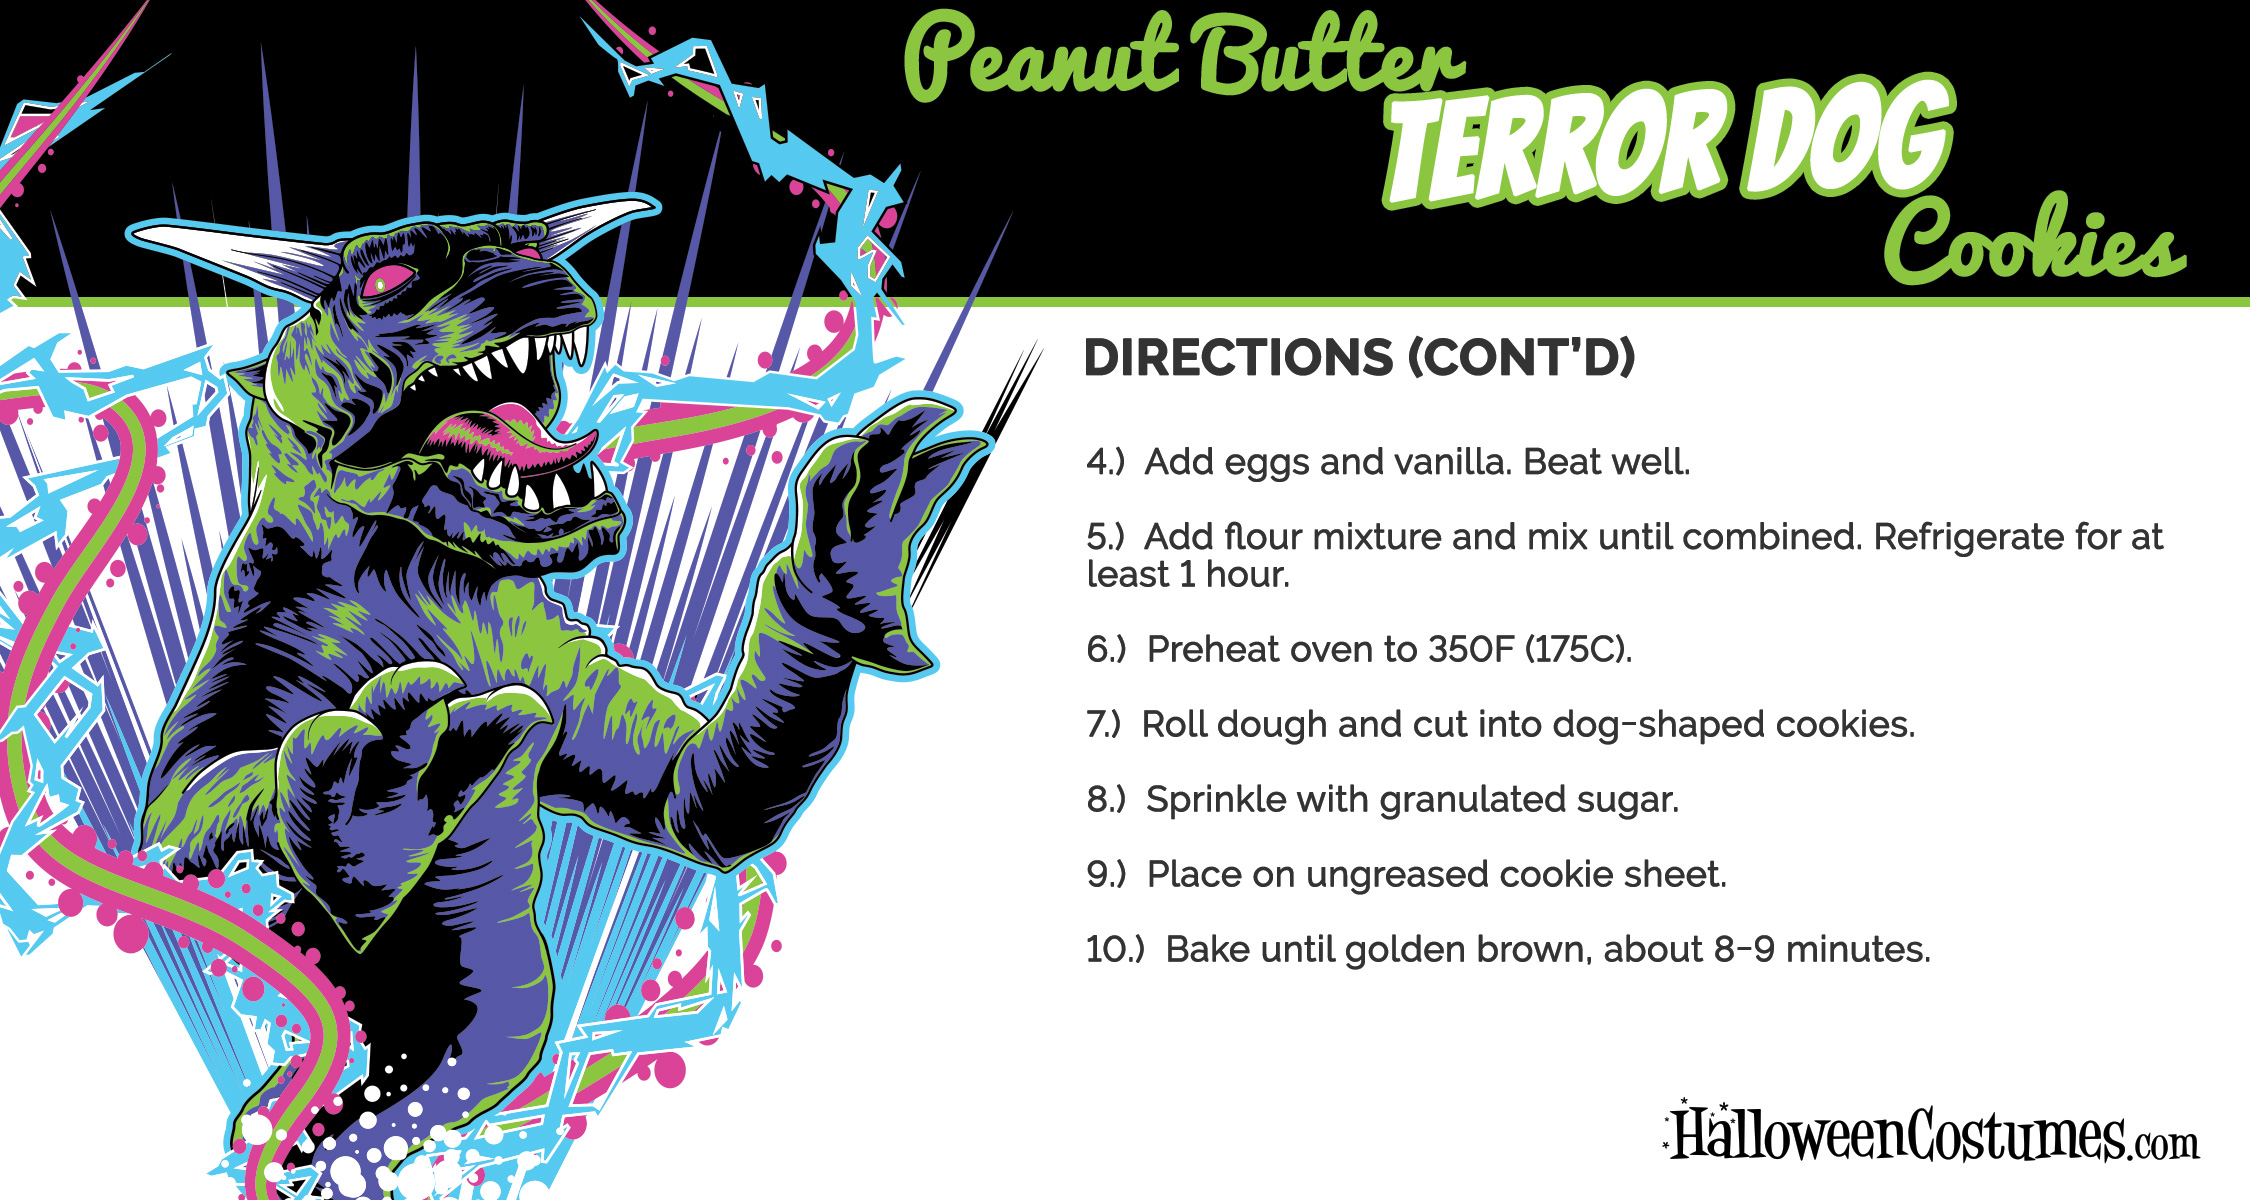 Peanut Butter Terror Dog Cookies page 2